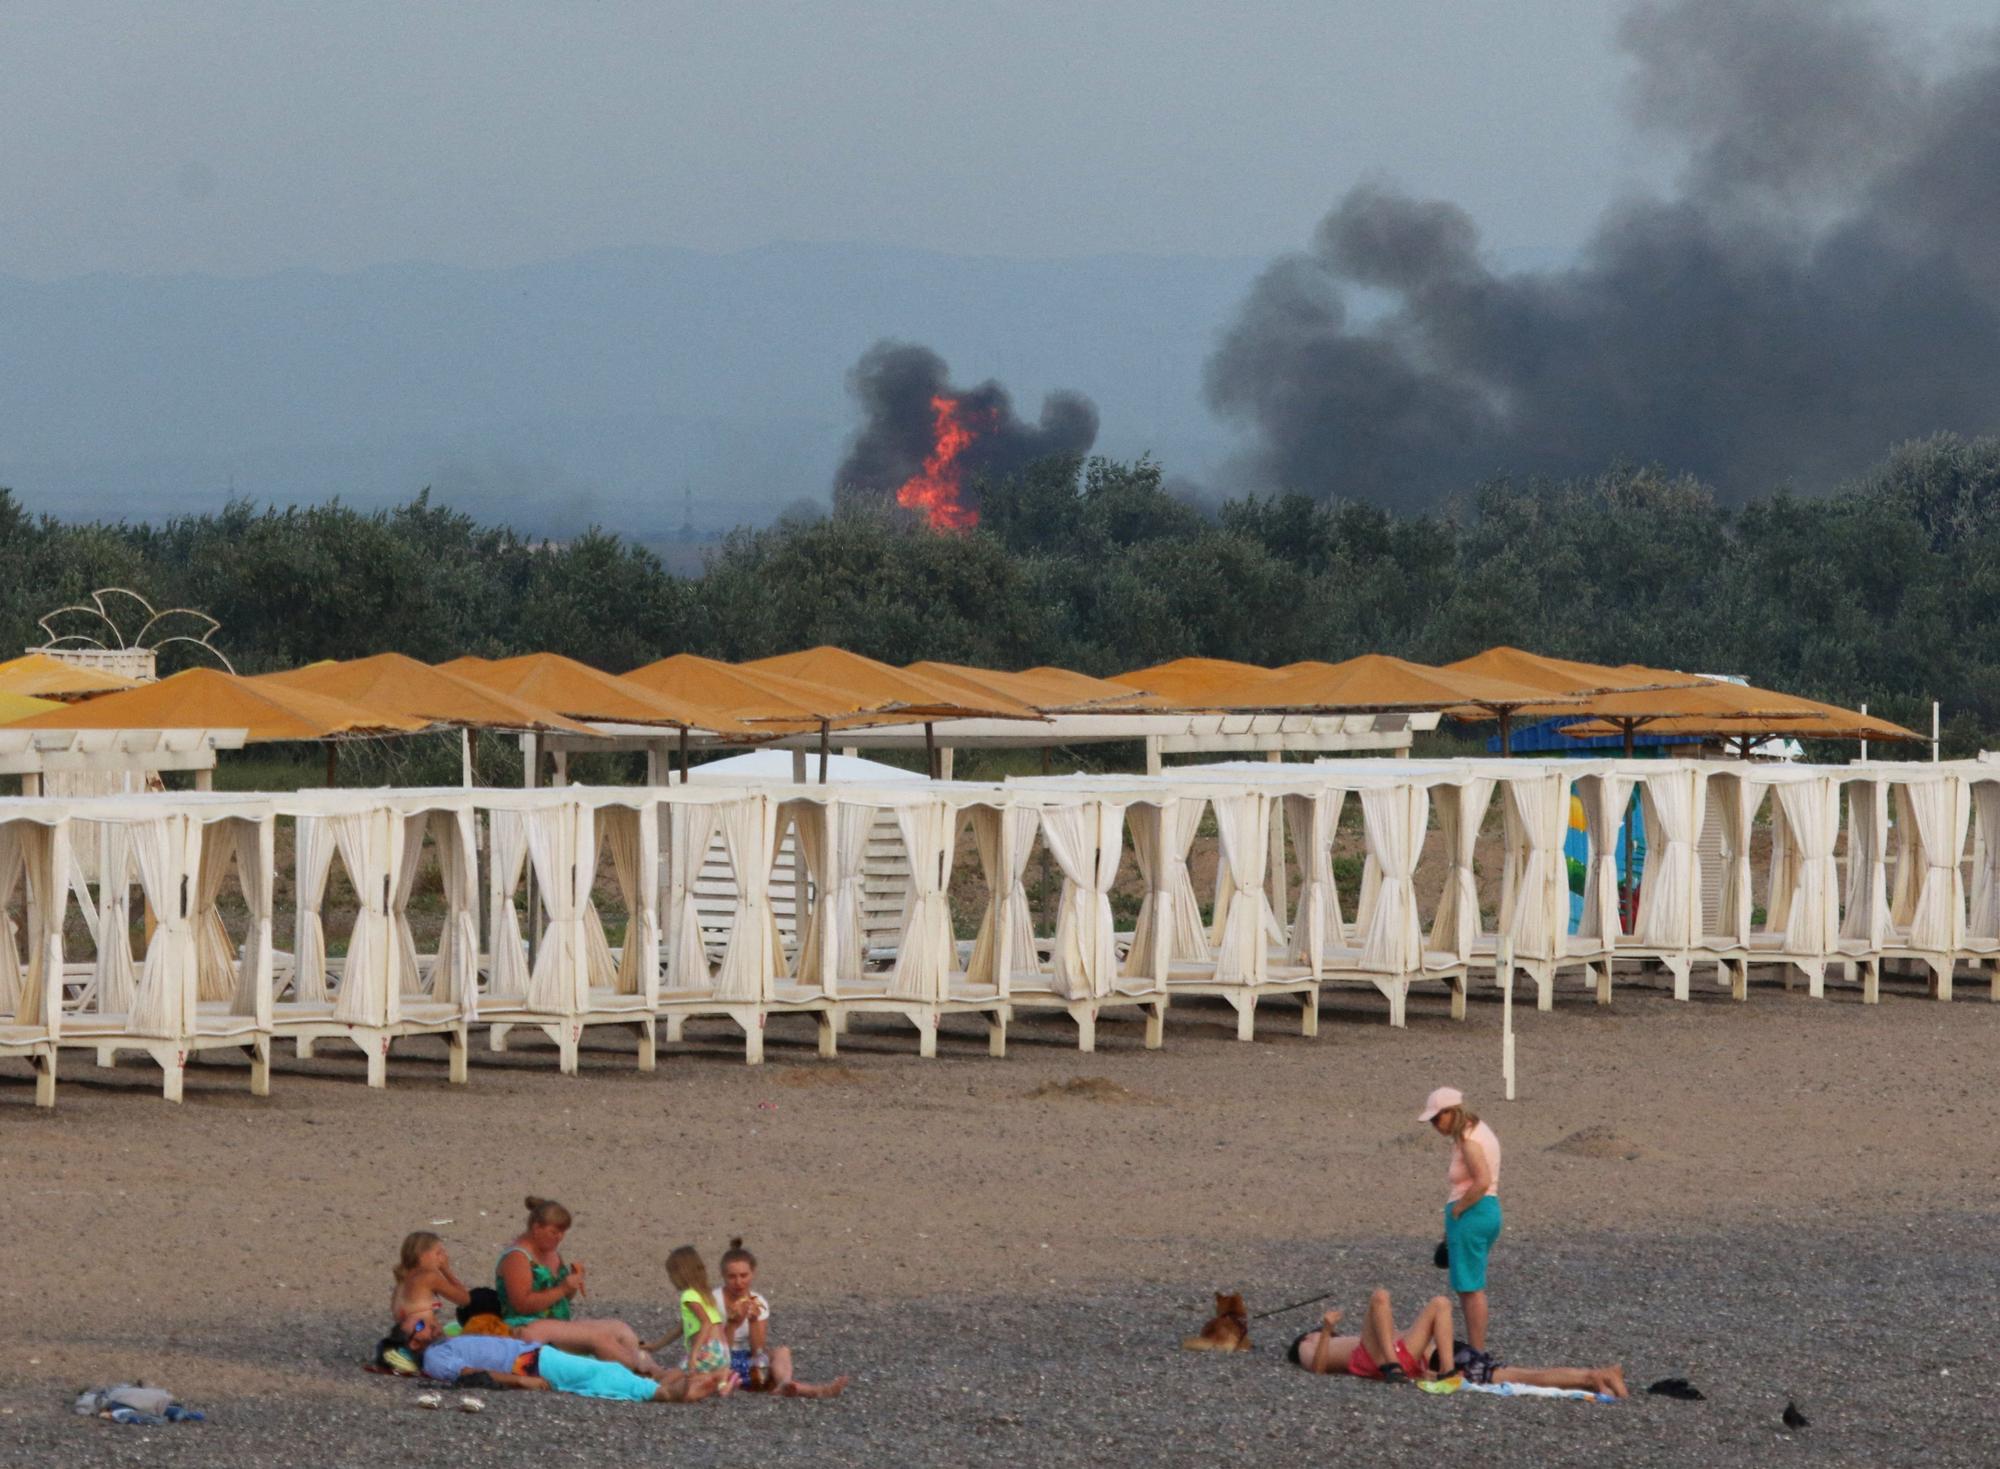 People rest on a beach as smoke and flames rise after explosions at a Russian military airbase, in Novofedorivka, Crimea August 9, 2022.